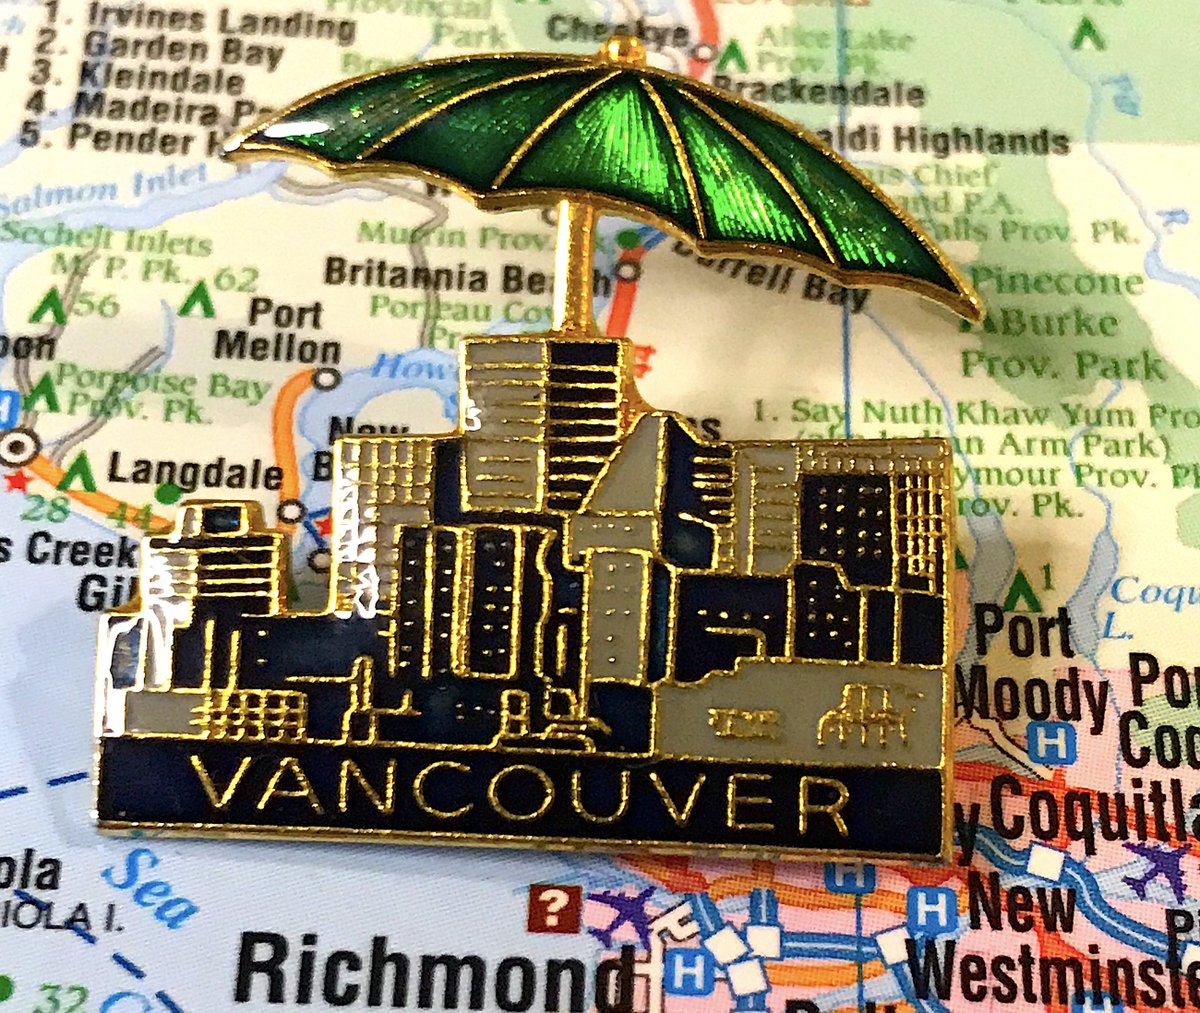 17. VANCOUVER - There are many Vancouver pins; most are quite good - None 100% excite me but maybe that's because I live here- Love how cool and 80s the first one is, delighted by the umbrella in the second- We need more pins with Science World instead of Harbour Centre